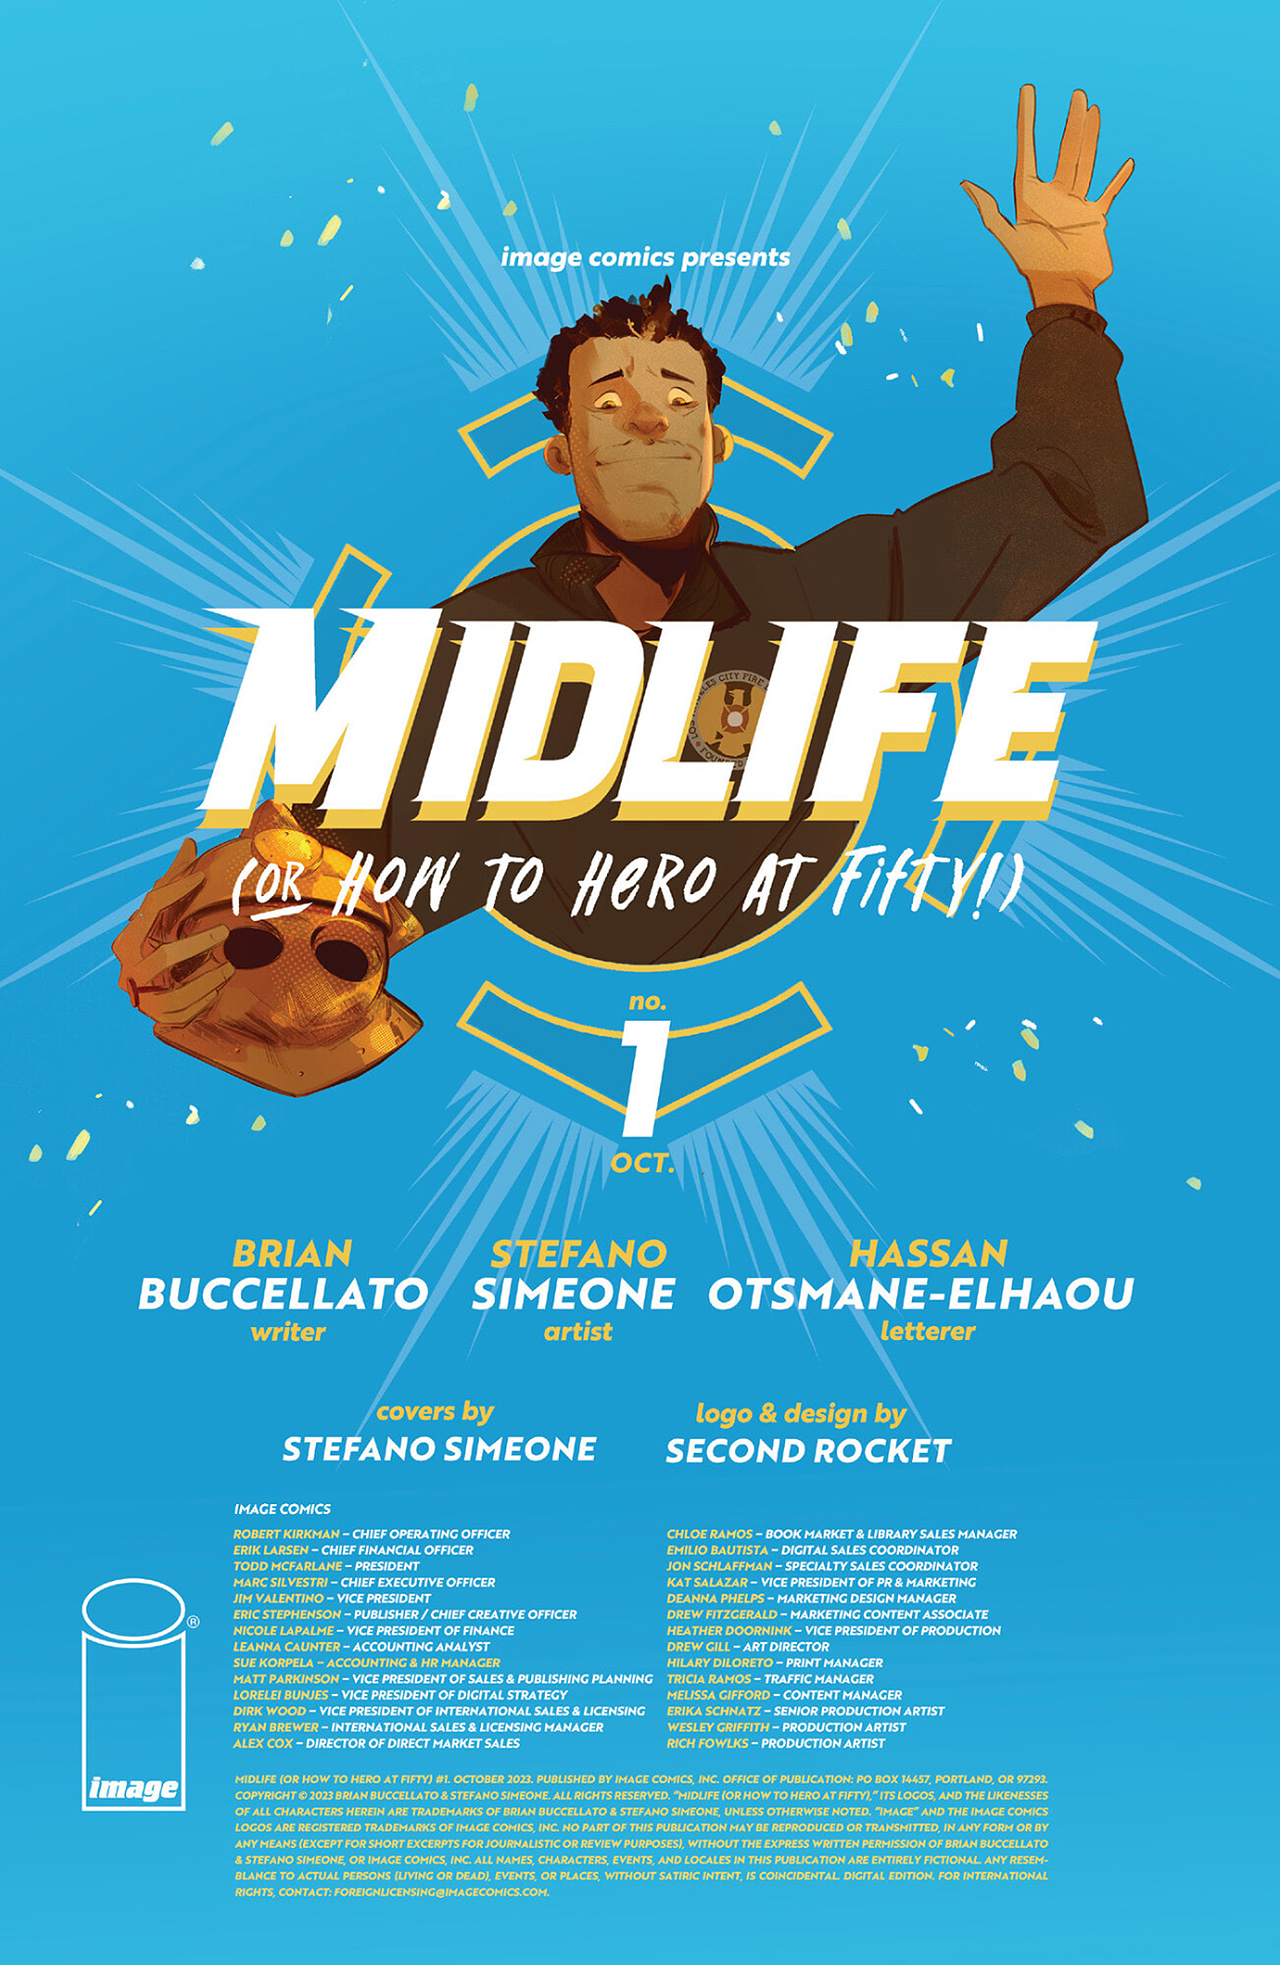 Read online Midlife (or How to Hero at Fifty!) comic -  Issue #1 - 2